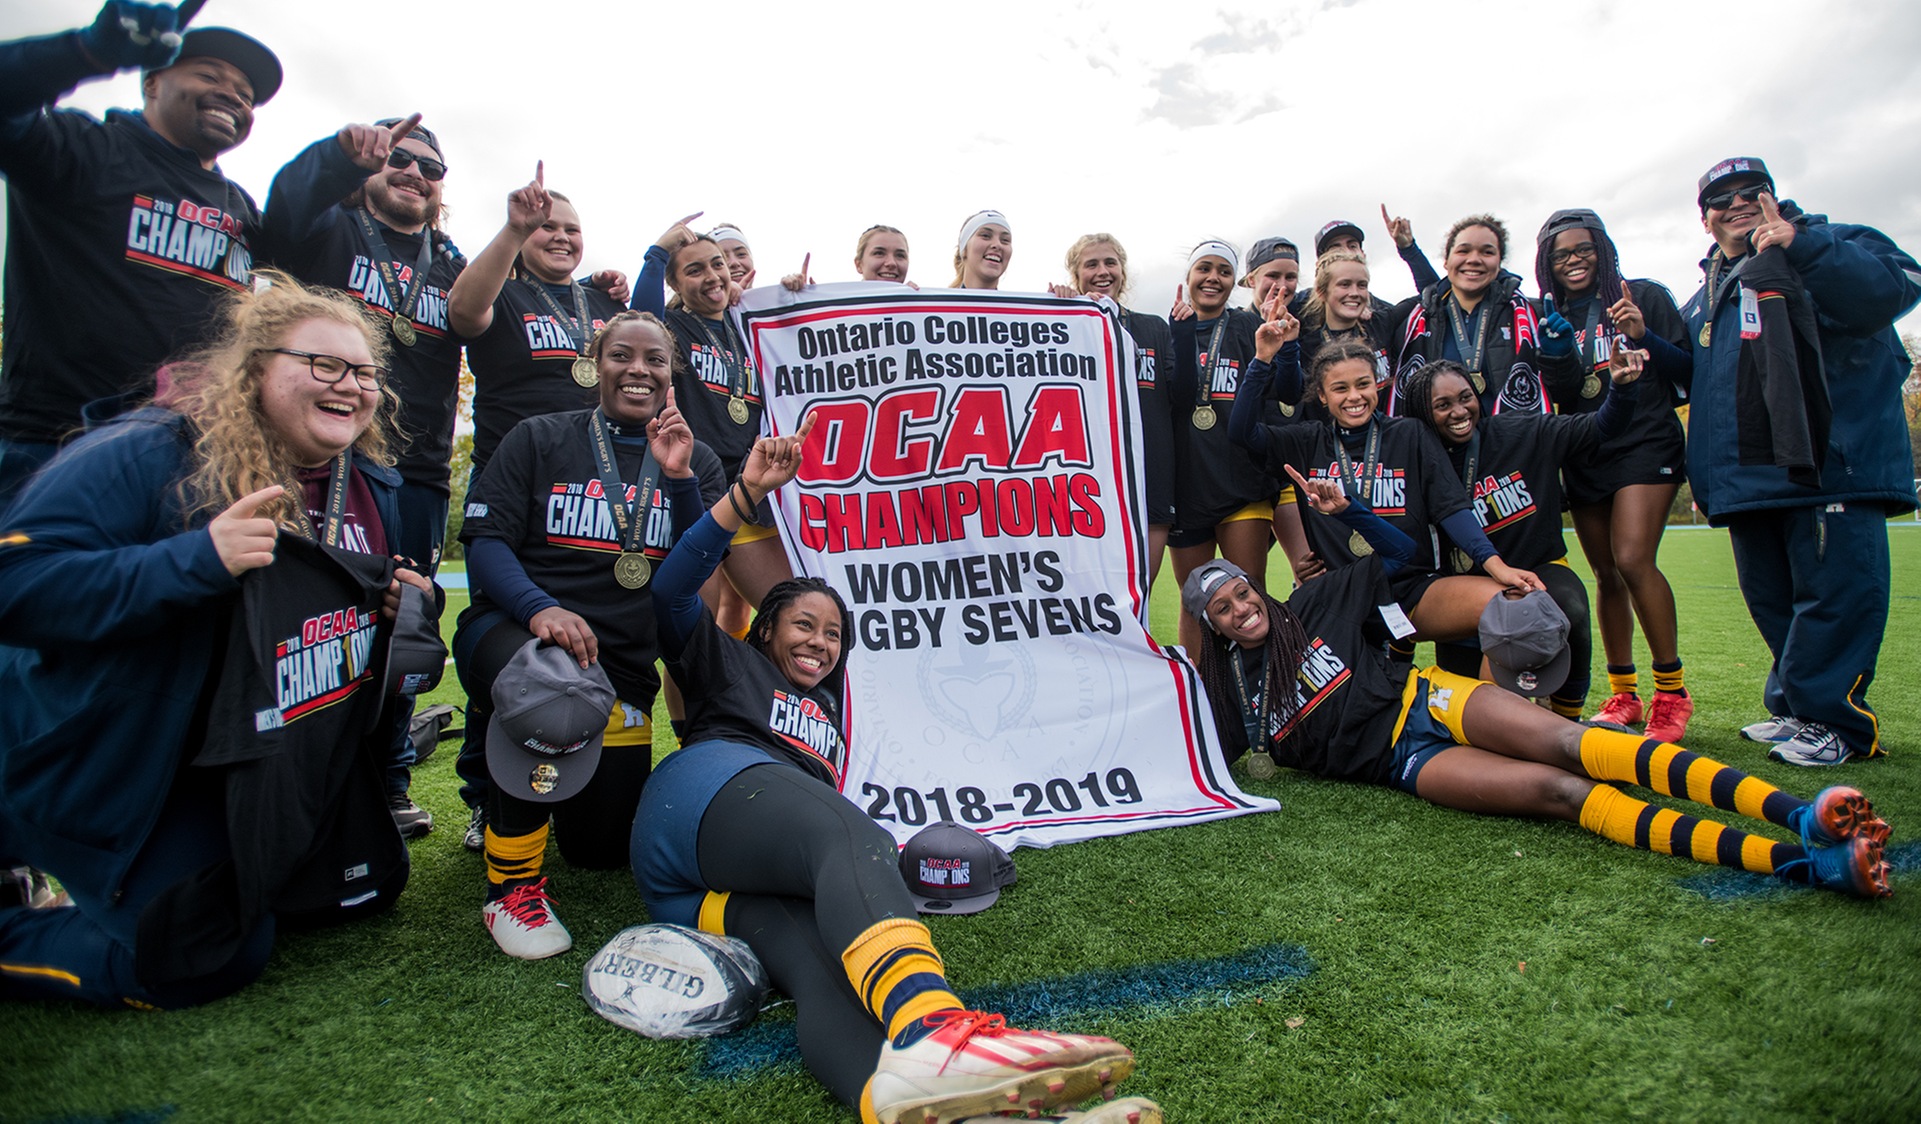 WOMEN'S RUGBY BEATS UNDEFEATED ALGONQUIN FOR OCAA TITLE, 14-5